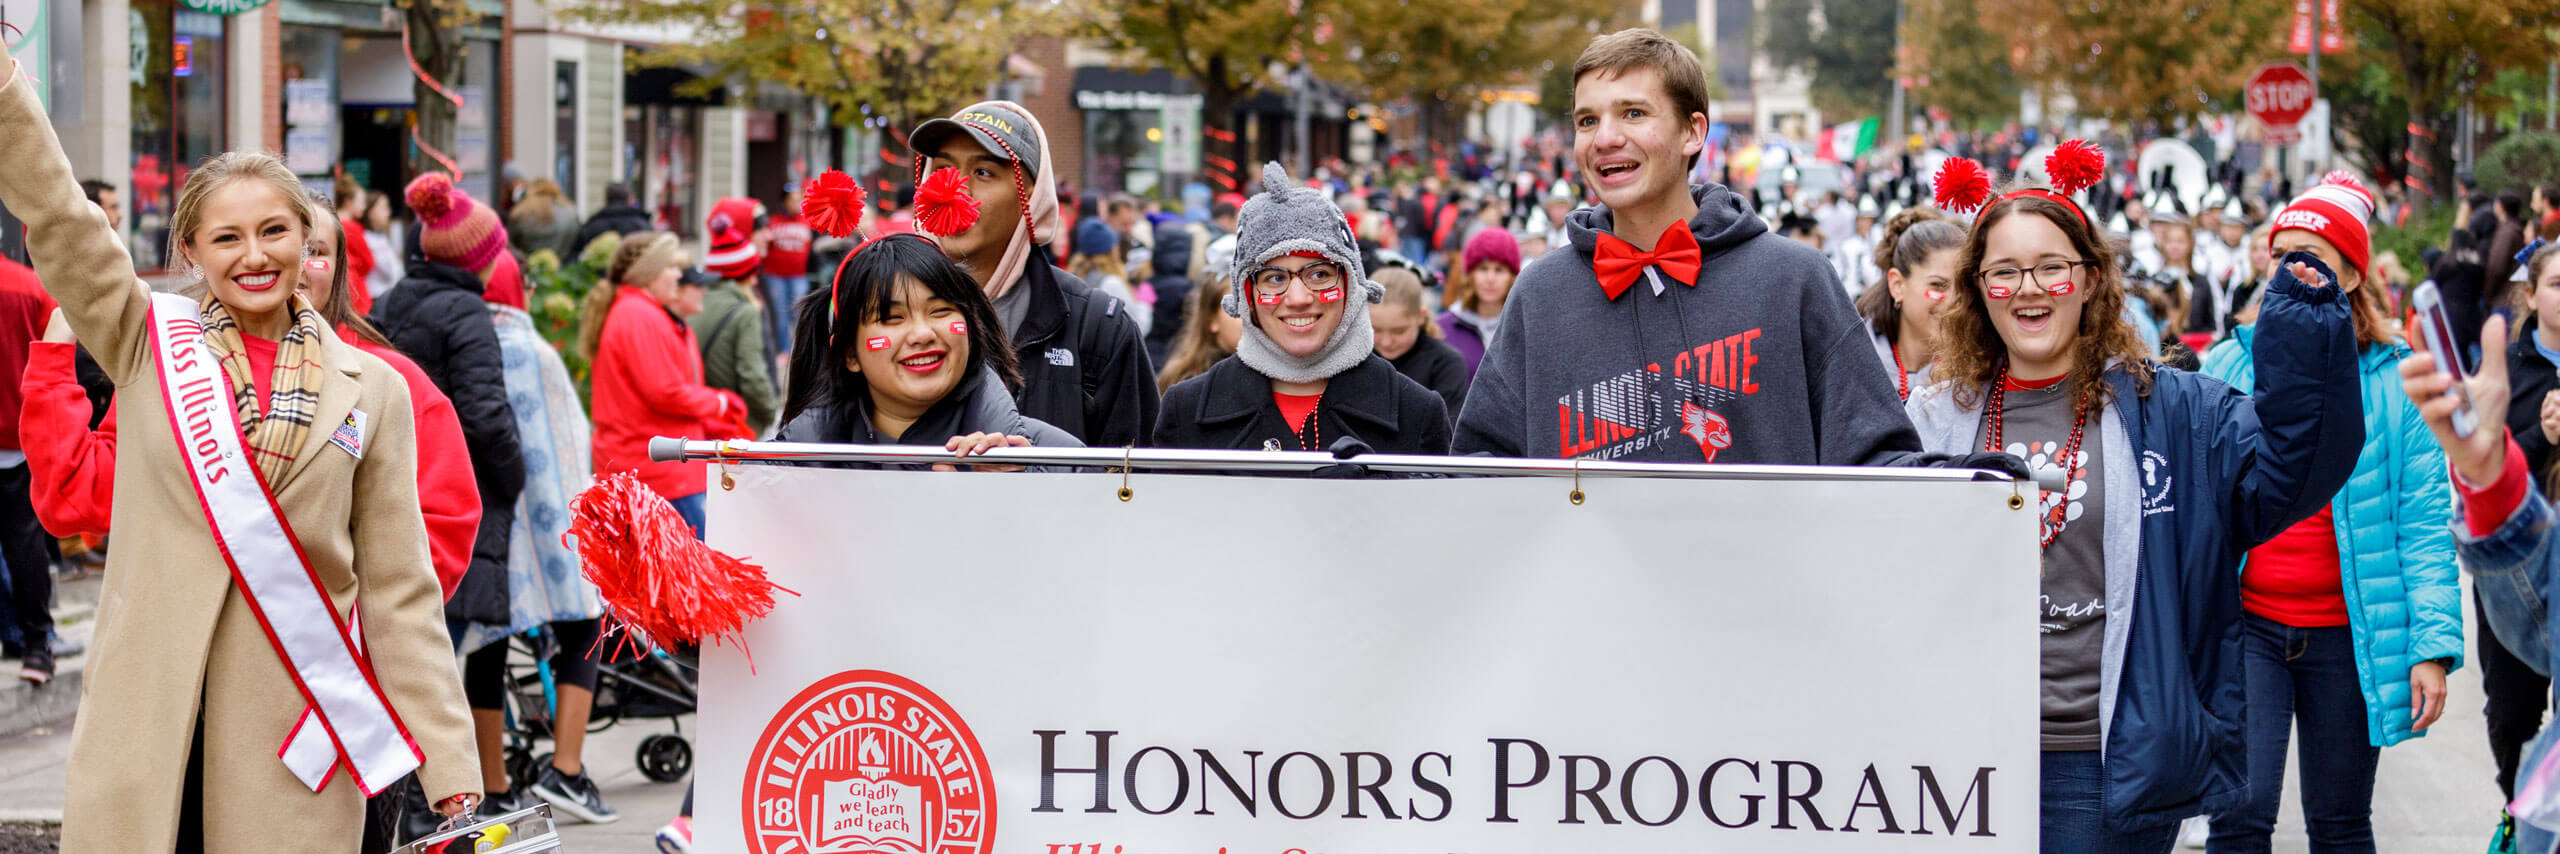 Students hold the Honors Program Banner in the 2019 Homecoming Parade.